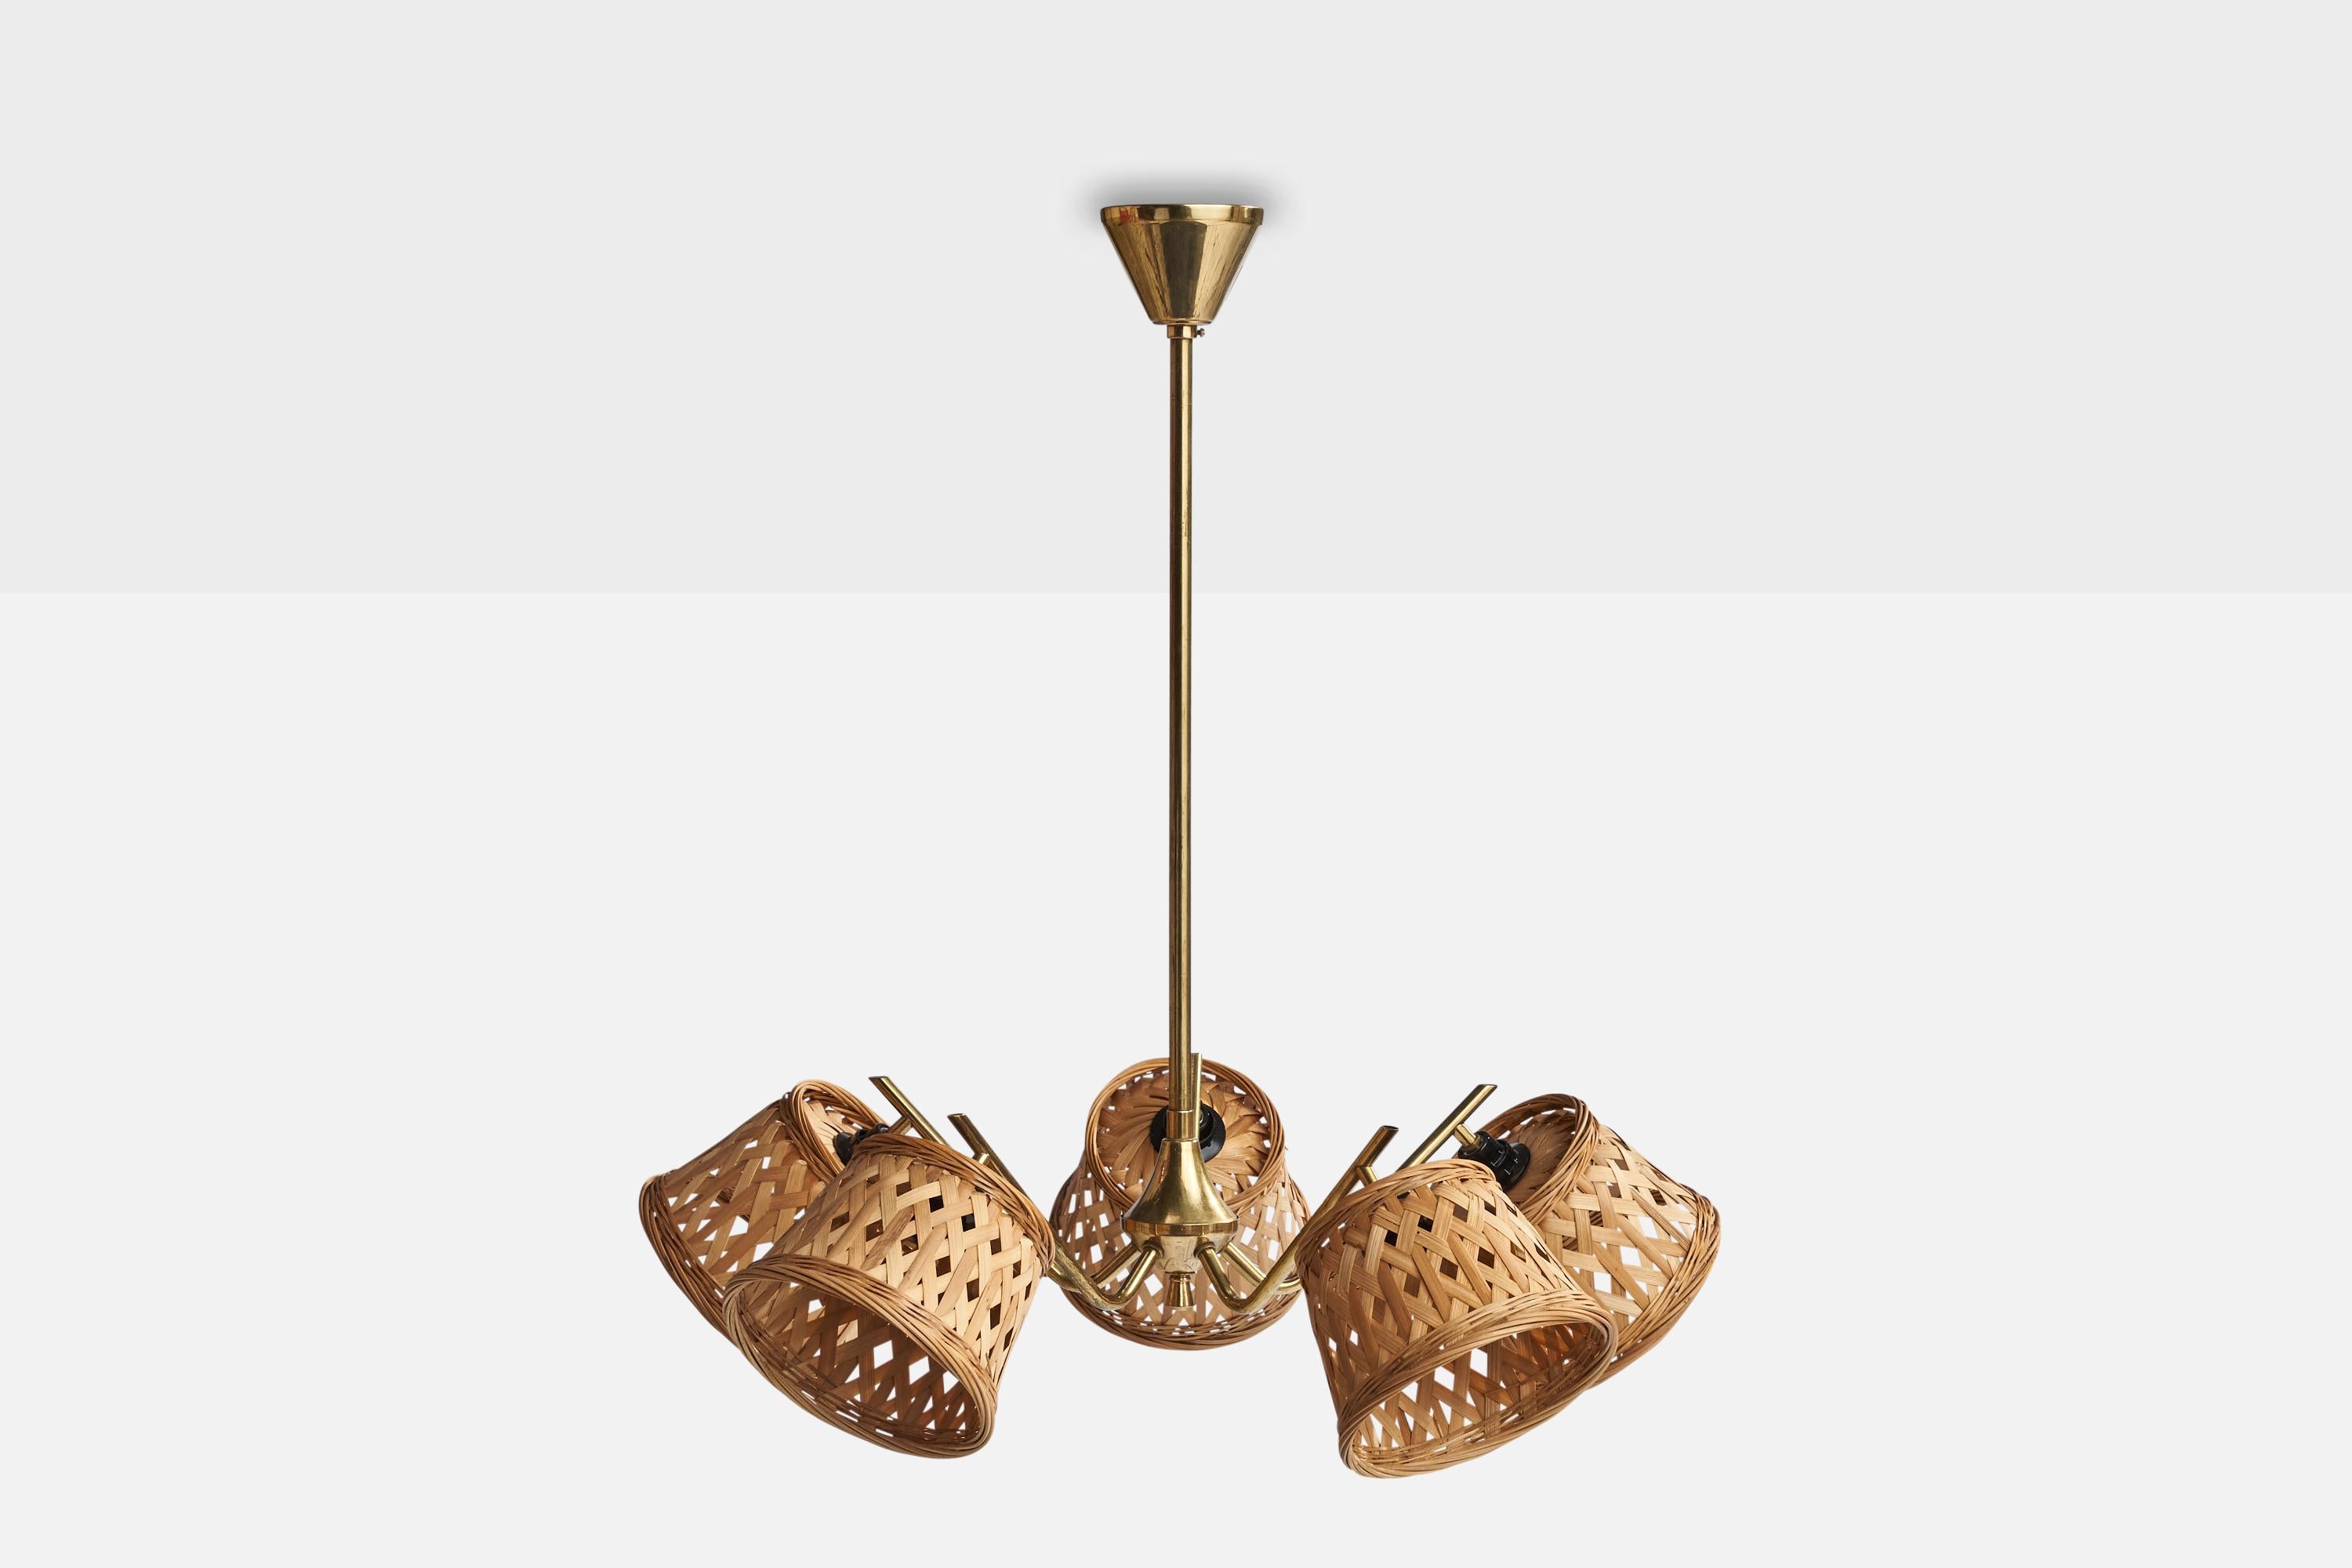 A brass and rattan chandelier designed and produced in Sweden, 1950s.

Dimensions of canopy (inches): 2.5” H x 3.5” Diameter
Socket takes standard E-14 bulbs. 5 sockets.There is no maximum wattage stated on the fixture. All lighting will be